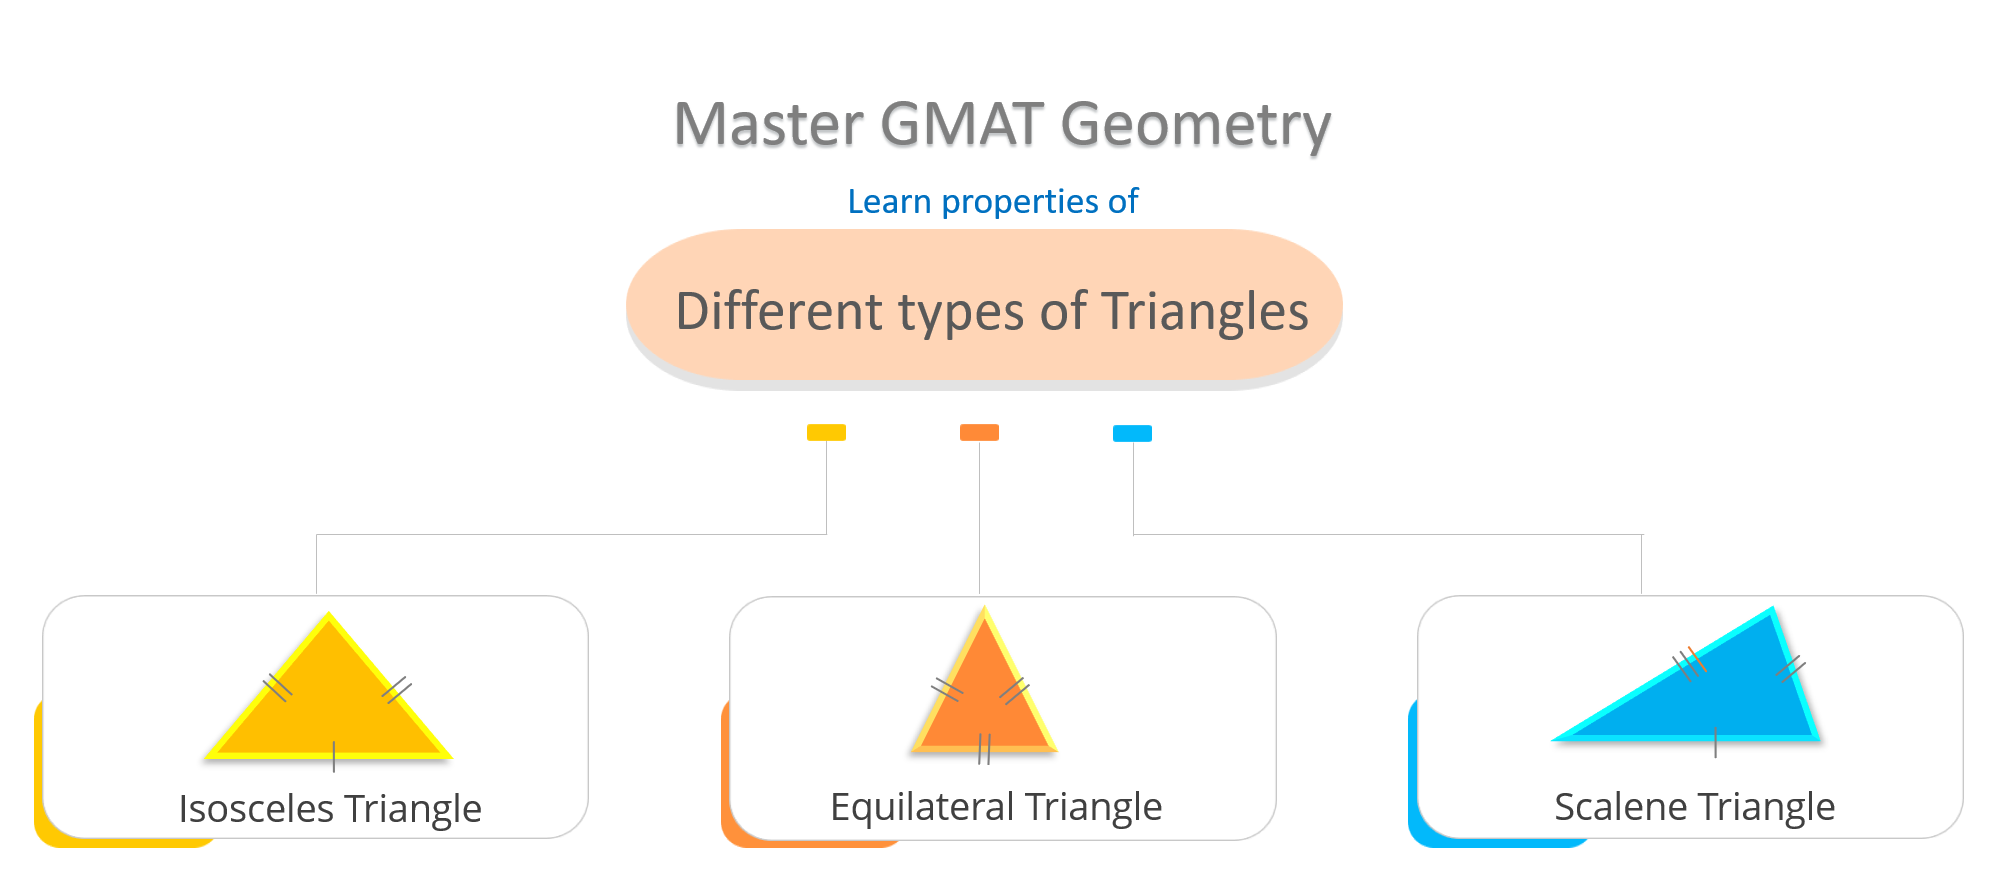 GMAT geometry practice questions | gmat geometry problems - Triangles